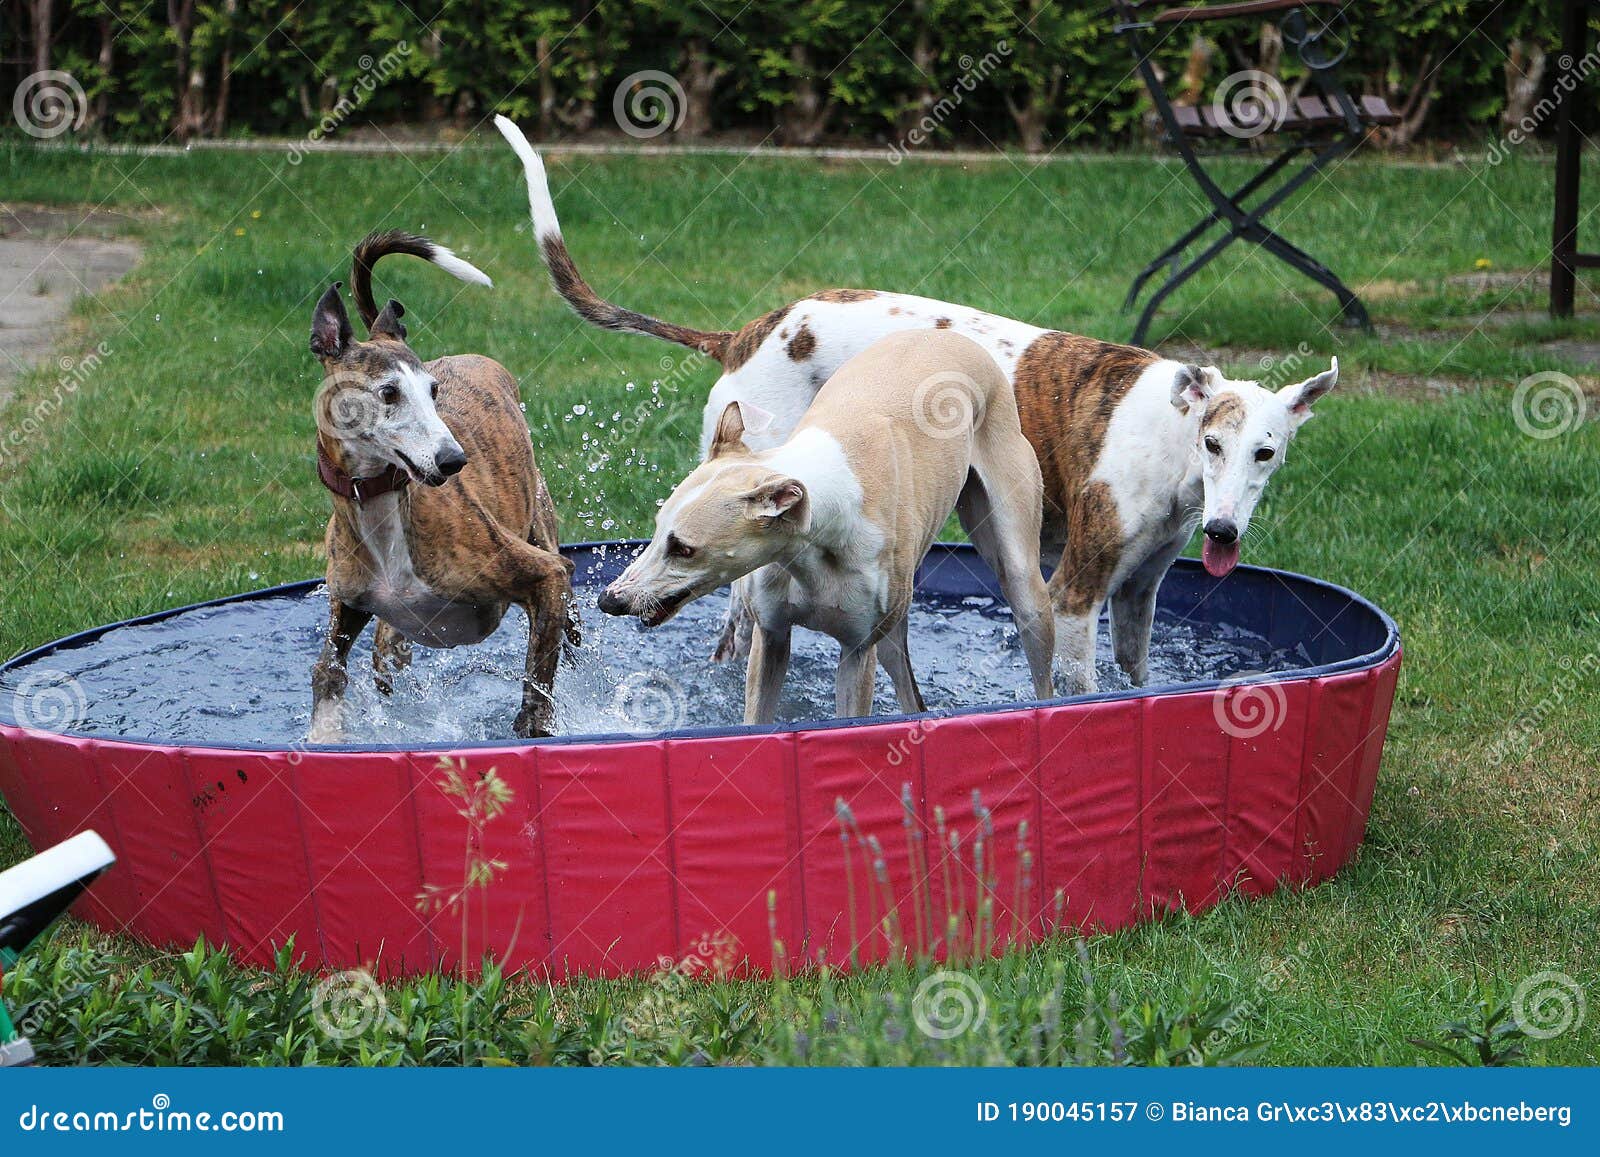 three funny galgos are playing in the pool in the garden